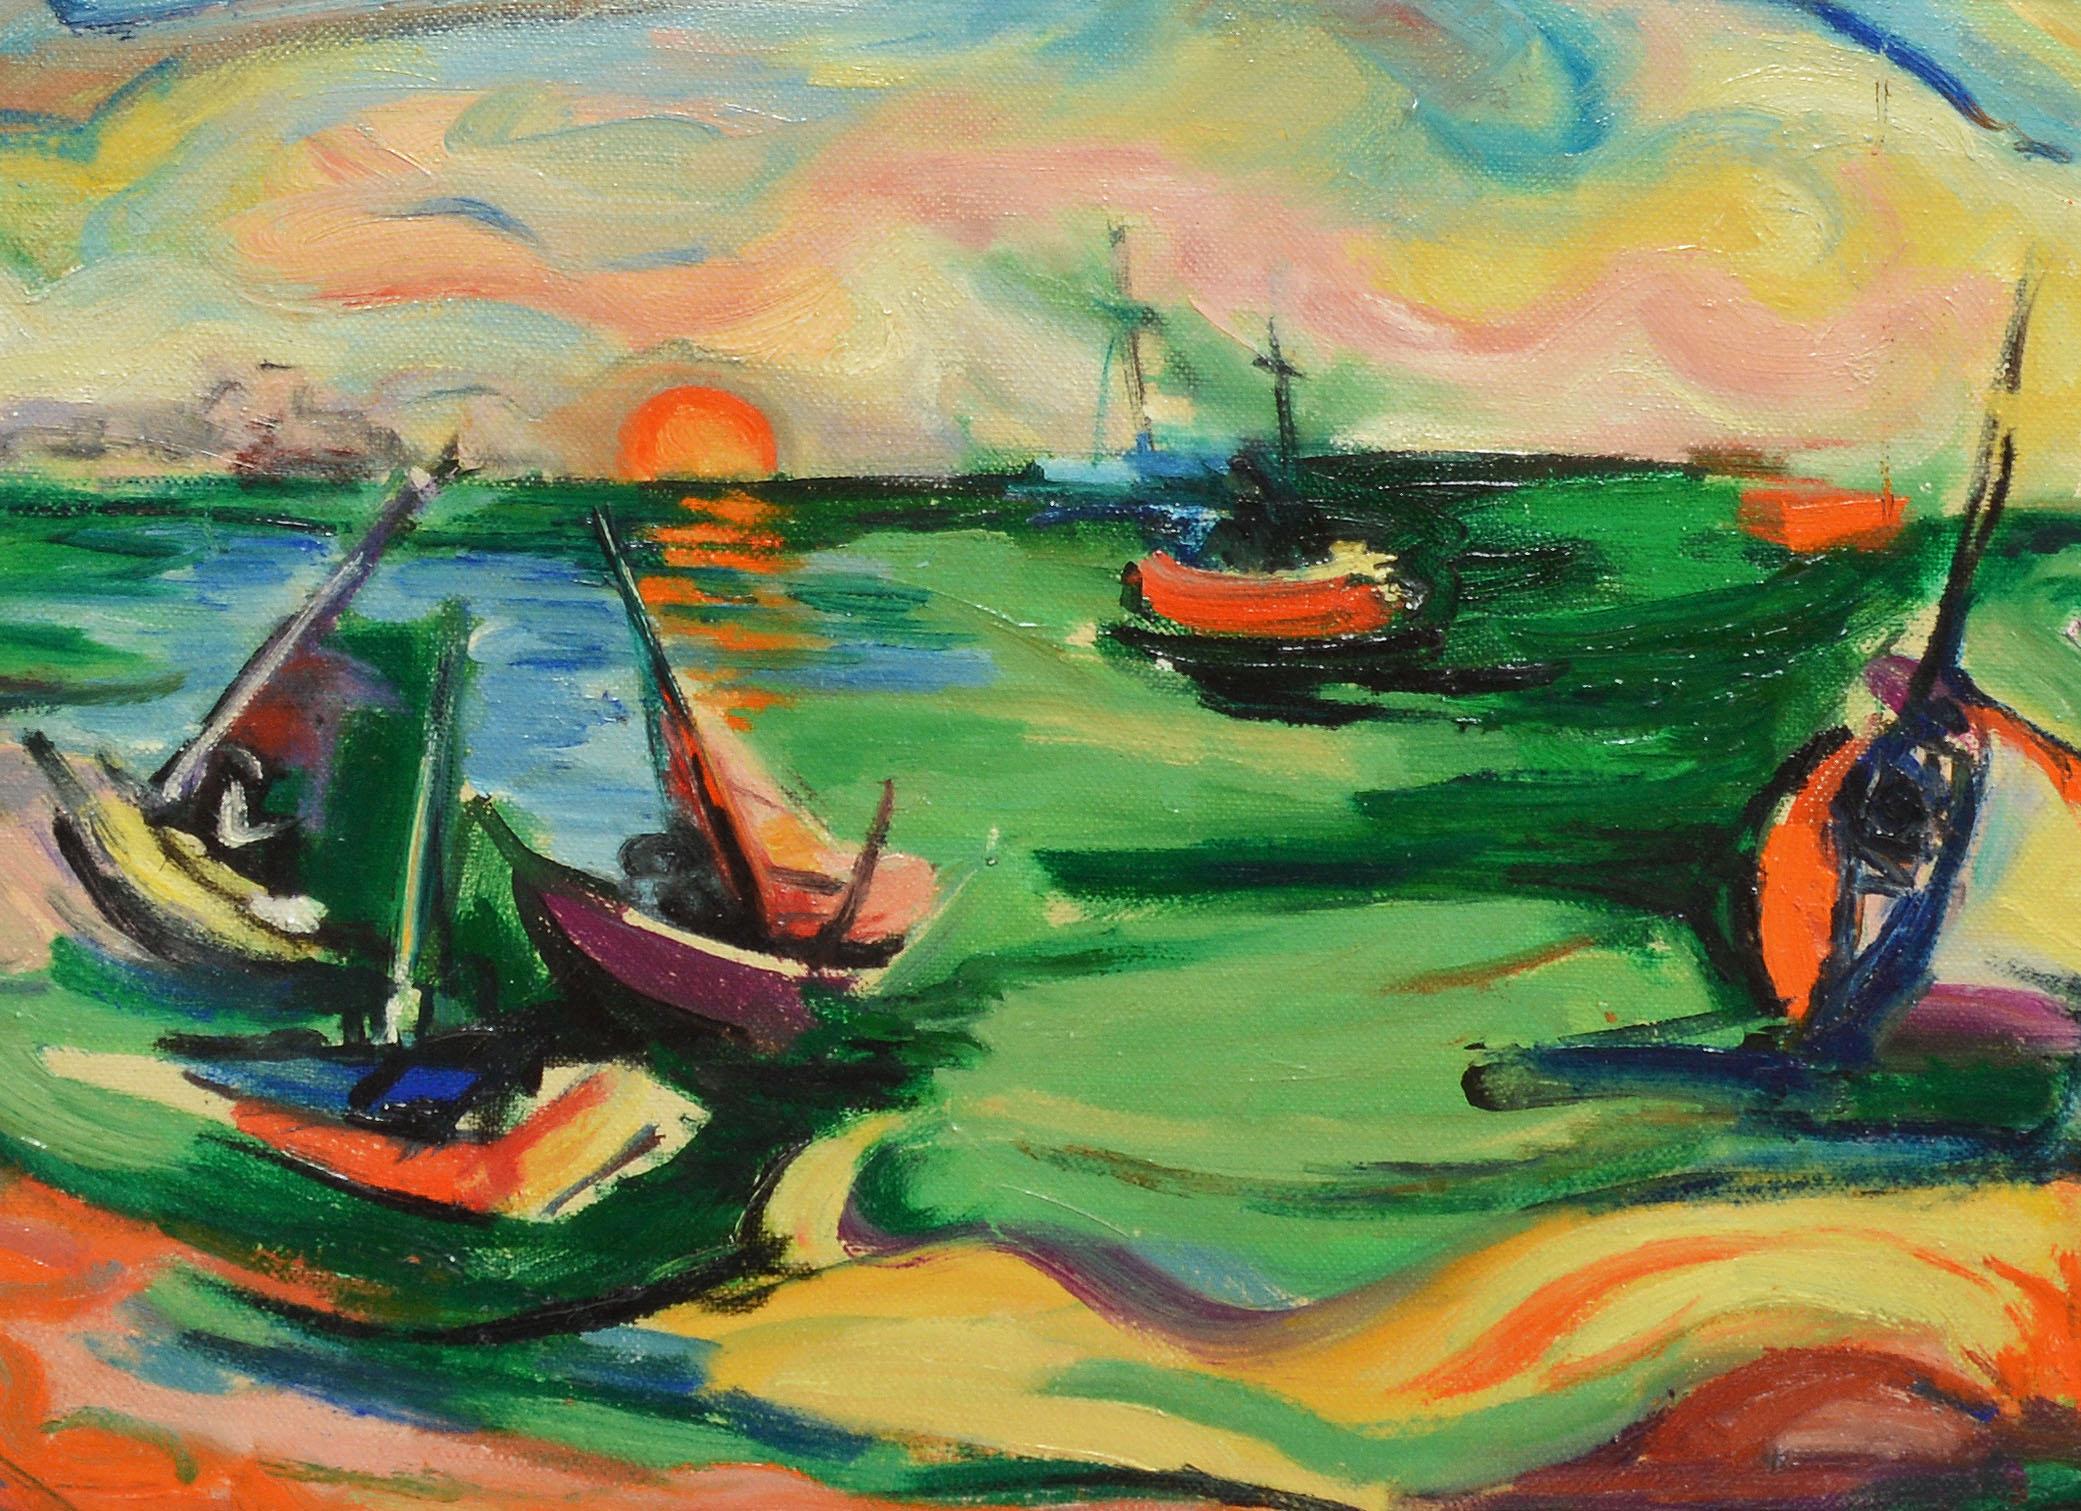 Modernist harbor view with a sunset by Mary Ascher  (1900 - 1988).  Oil on canvas, circa 1940.  Signed lower left.  Displayed in a modernist frame with linen liner.  Image size, 12